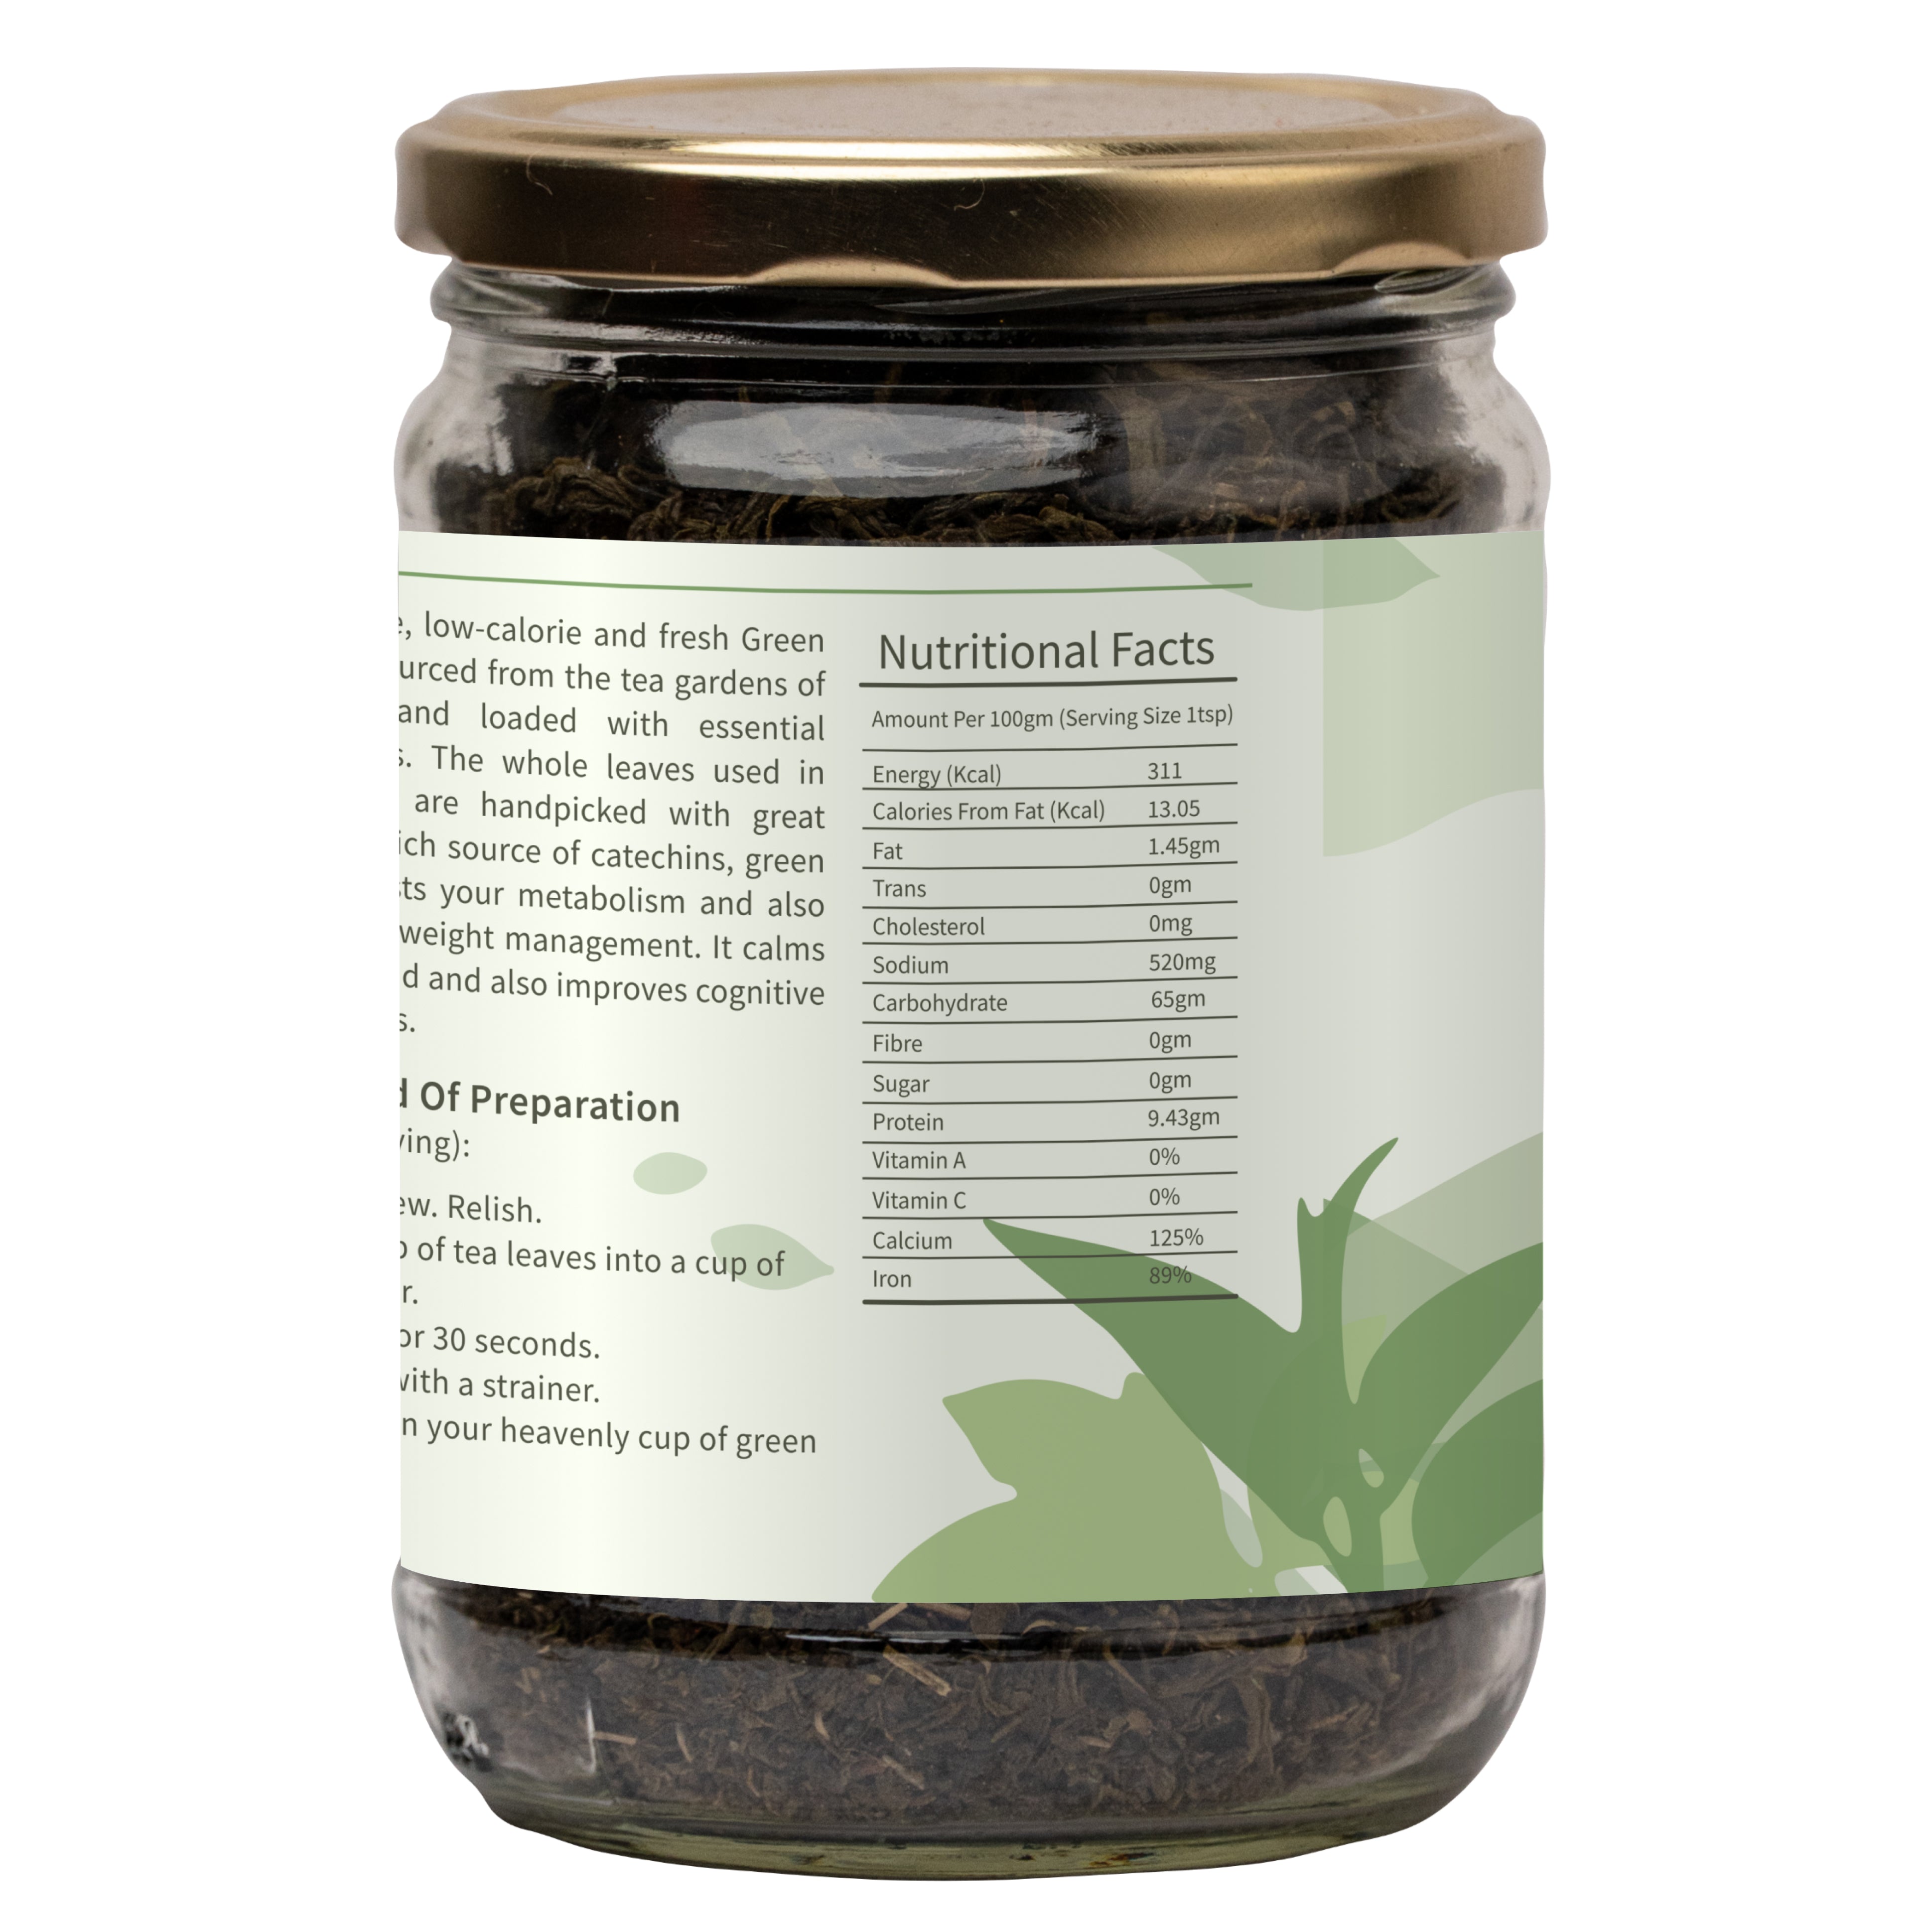 Ecotyl Green Tea Leaves | Natural | Handpicked | 180g